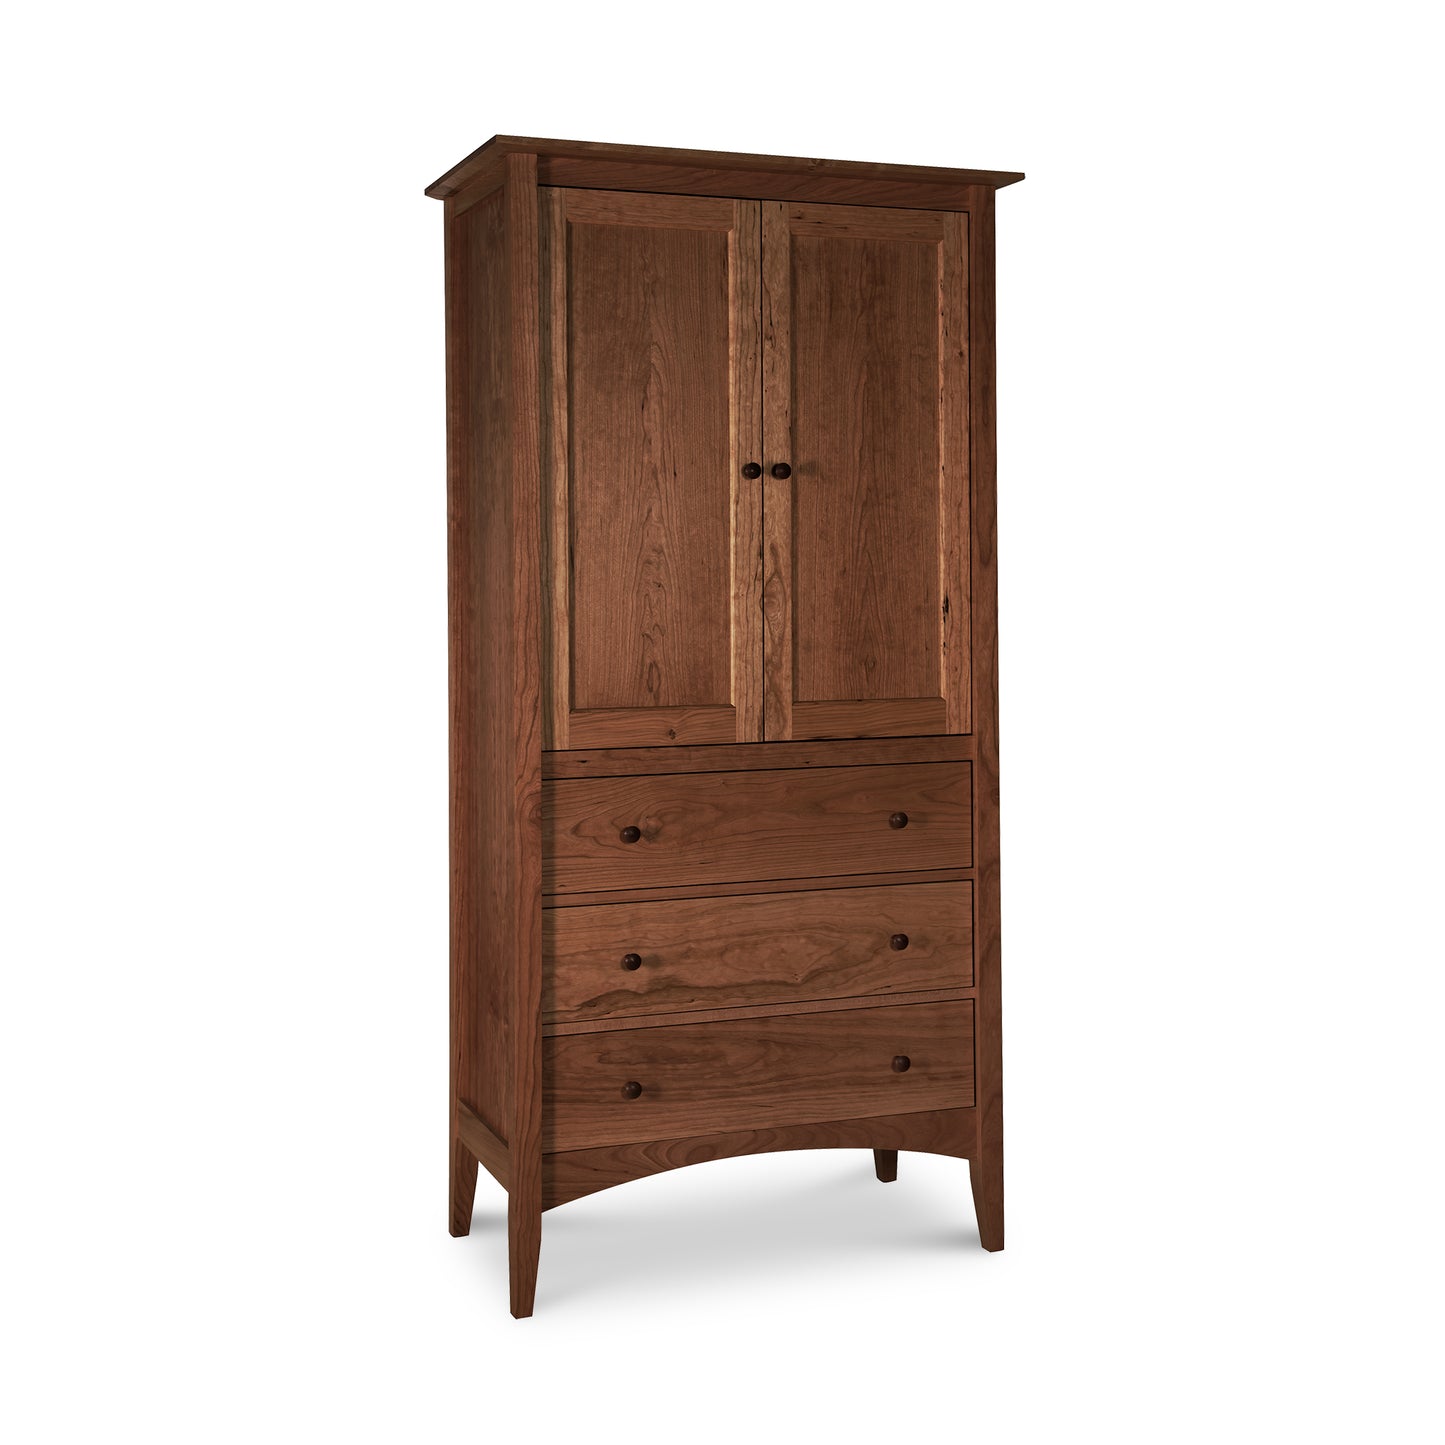 A Maple Corner Woodworks American Shaker Armoire with a cabinet section on top featuring two closed doors, and a lower section with three drawers, set against a white background.